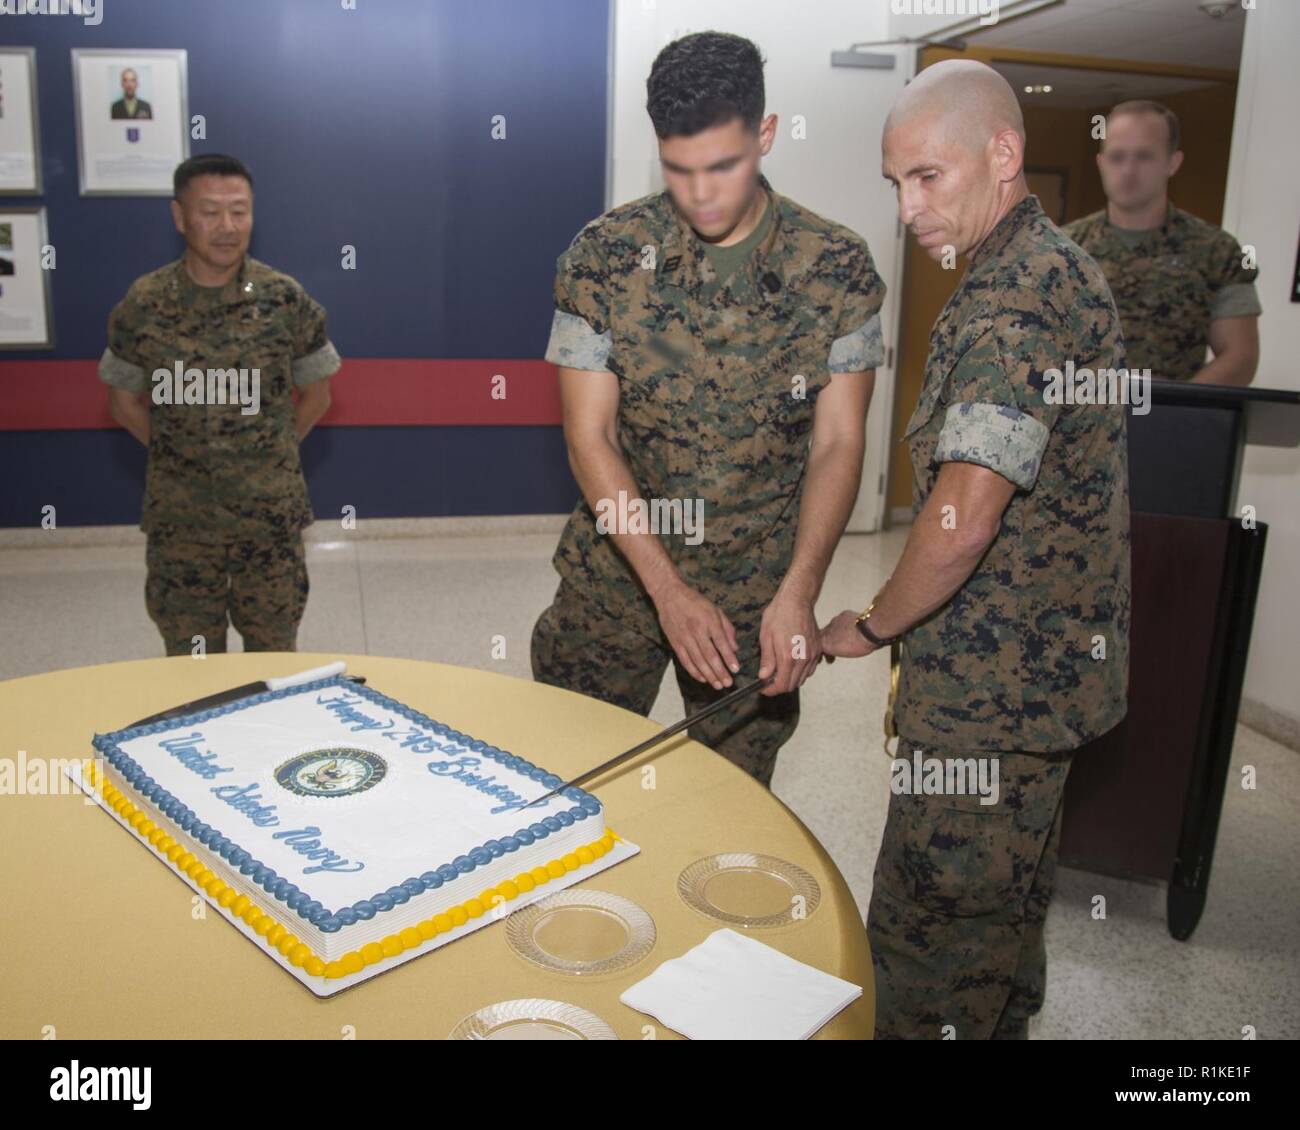 The oldest and youngest Sailors with U.S. Marine Corps Forces, Special Operations Command, cut the ceremonial birthday cake for the Navy’s 243rd birthday at MARSOC Headquarters aboard Marine Corps Base Camp Lejeune, N.C., Oct. 15, 2018.  The oldest Sailor (right) was born in 1968 and the youngest (center) in 1998.  The oldest Sailor passes cake to the youngest Sailor in a tradition that represents the transfer of experience and knowledge.  MARSOC Commander, General Daniel D. Yoo (left), was honored as the guest of honor during the ceremony. Stock Photo